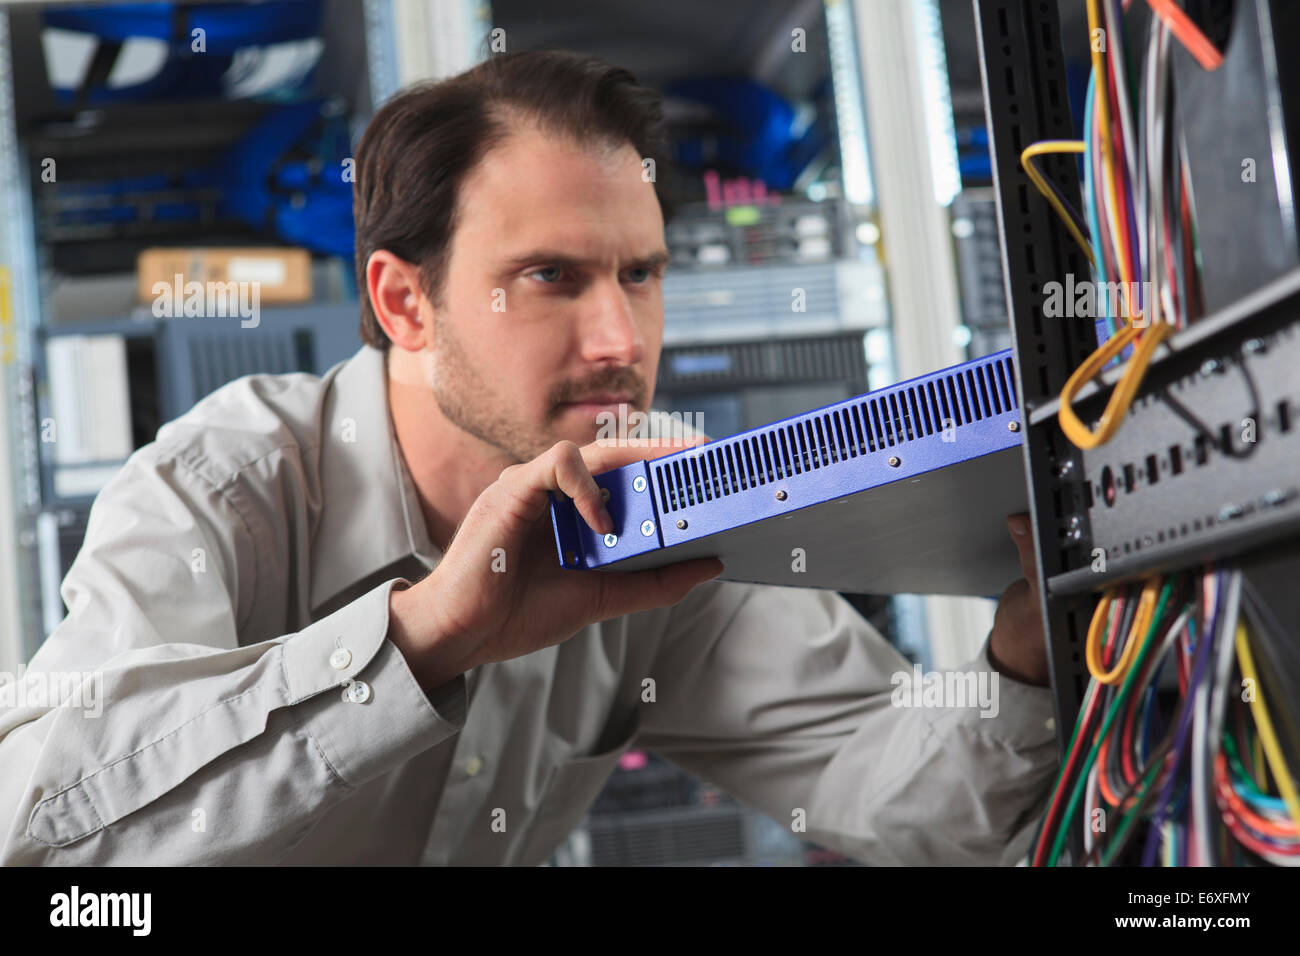 Network engineer installing switch in data center Stock Photo